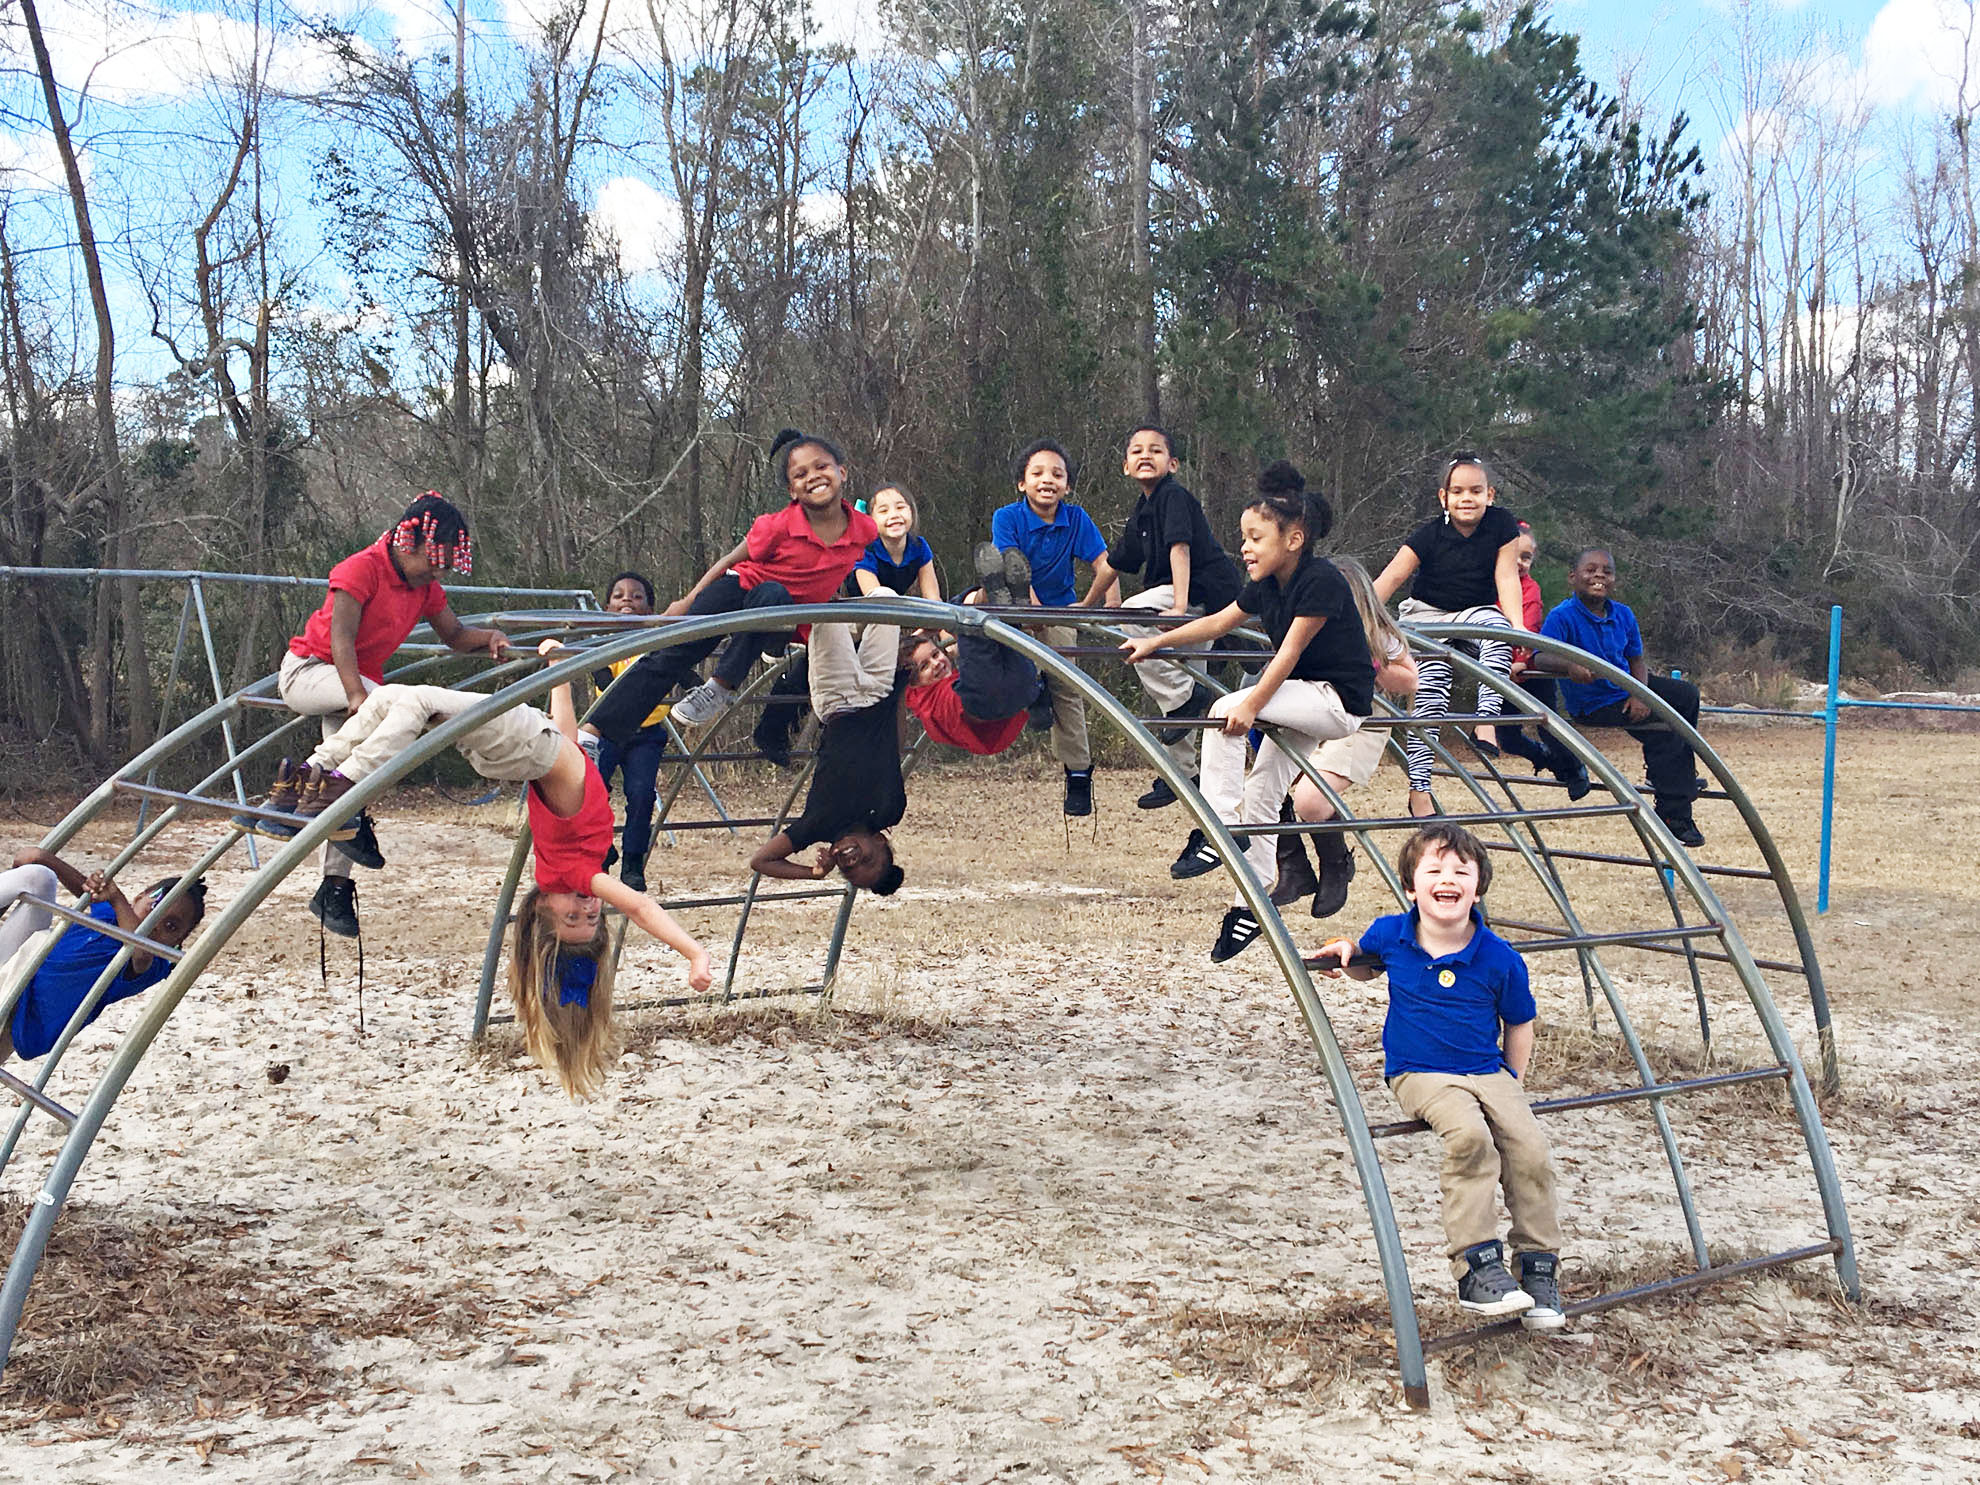 Rebecca Owens' kindergarten class enjoys a sunny day on the playground at Whiteville Primary School